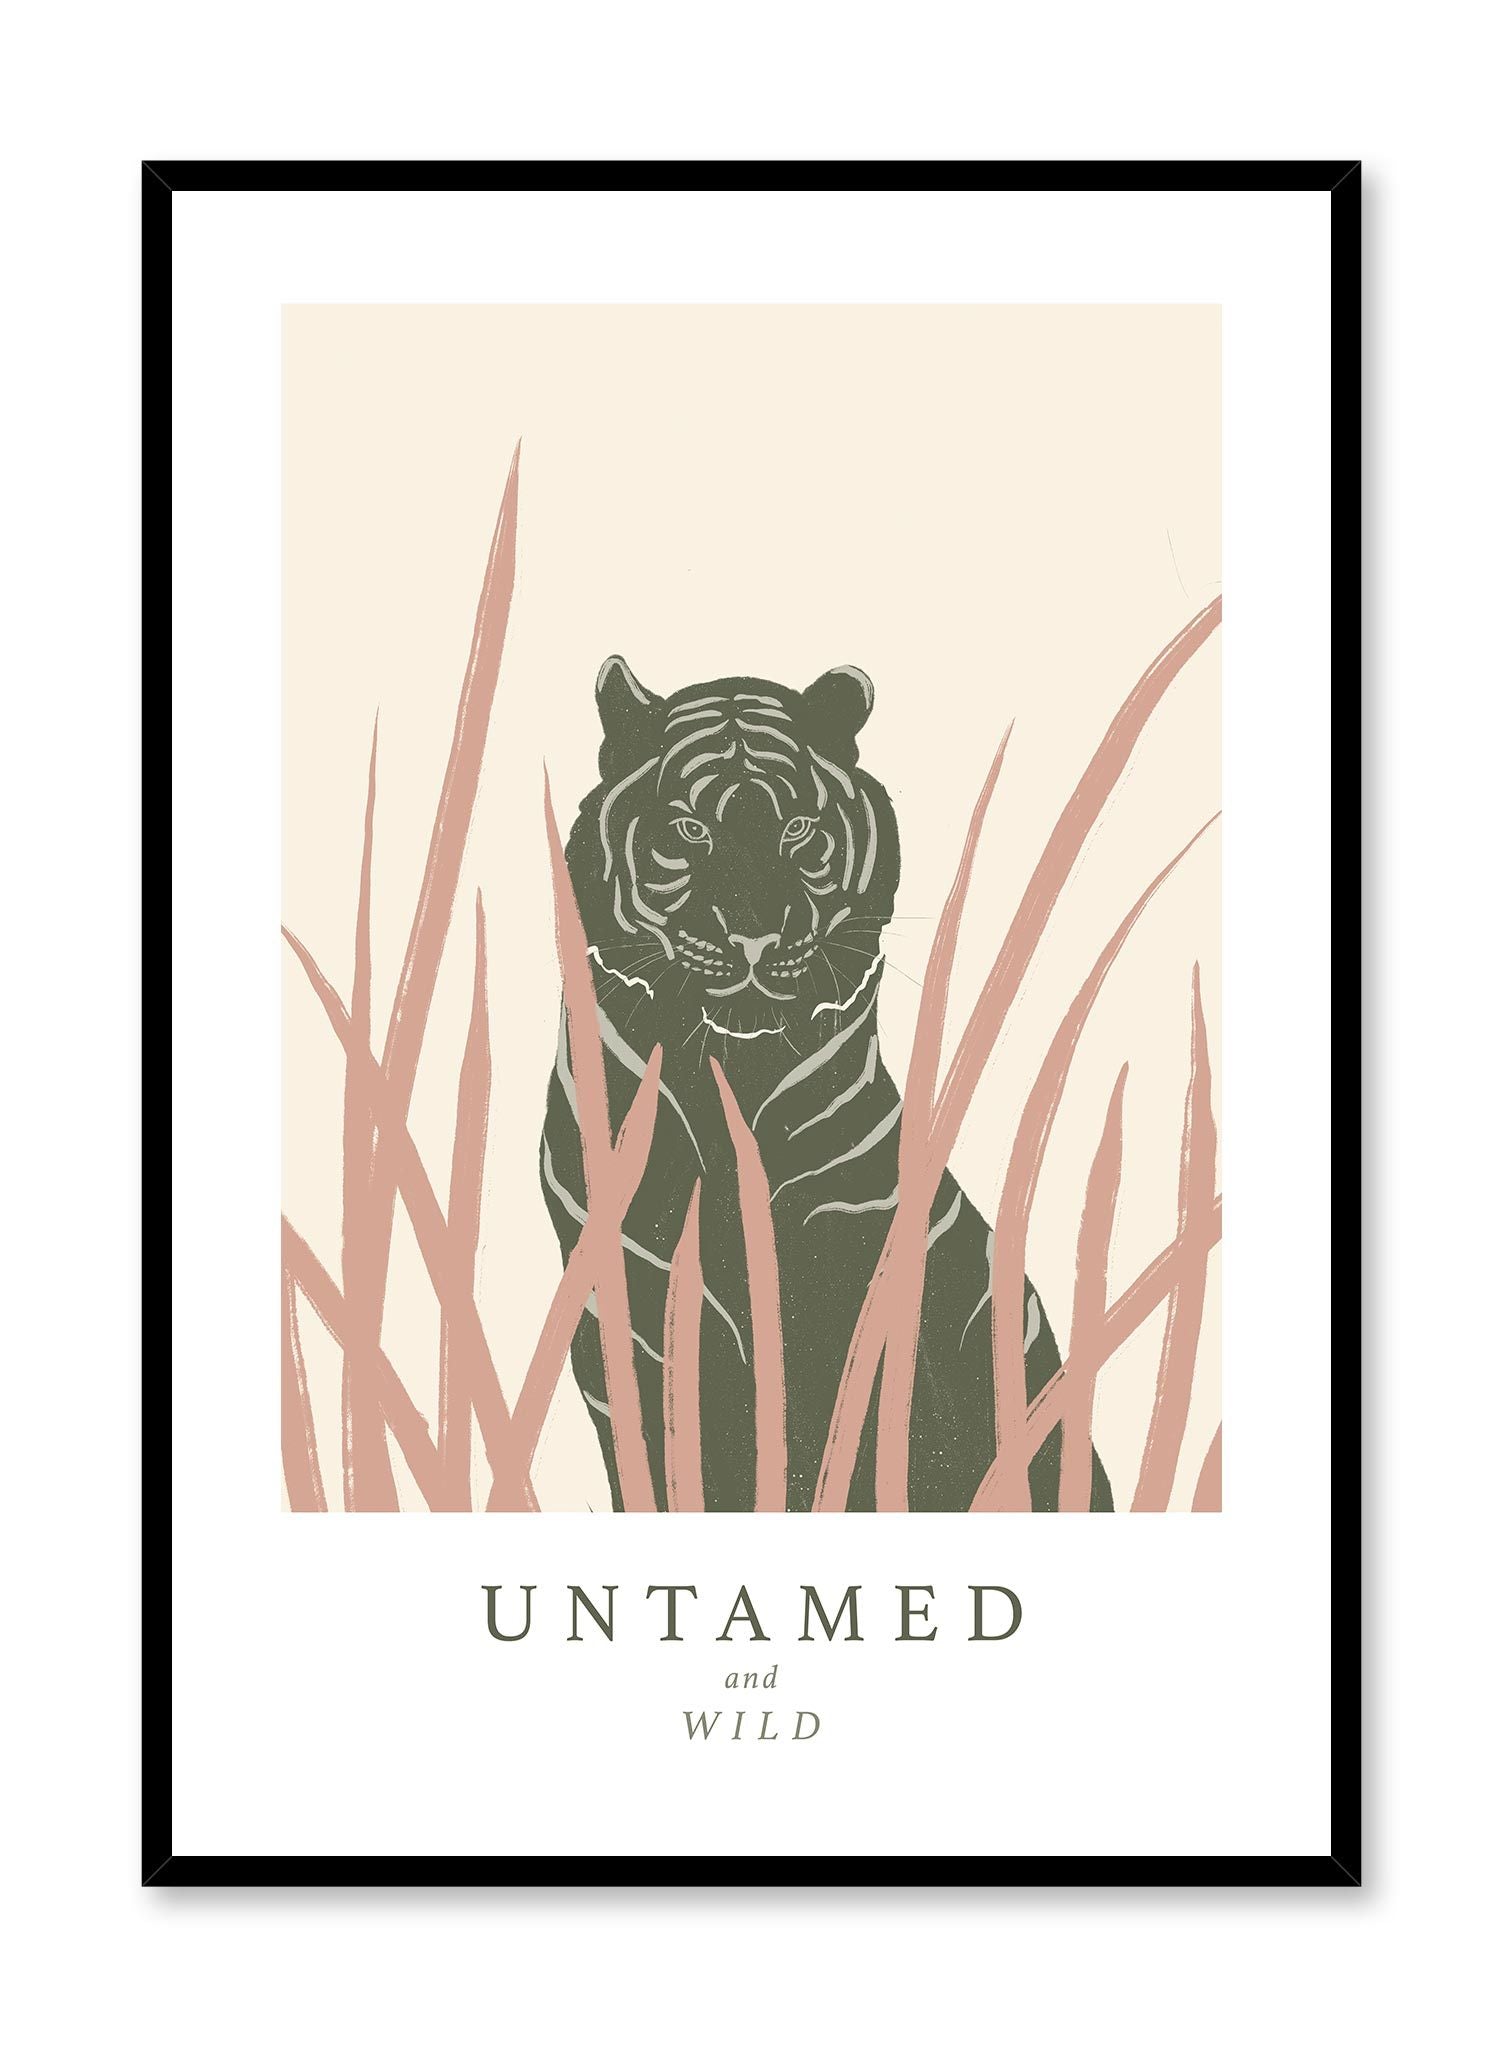 Freedom Cat is a minimalist illustration if a dark green tiger ready to pounce through the pink grass in front of it with the words "Untamed and Wild" at the bottom by Opposite Wall.